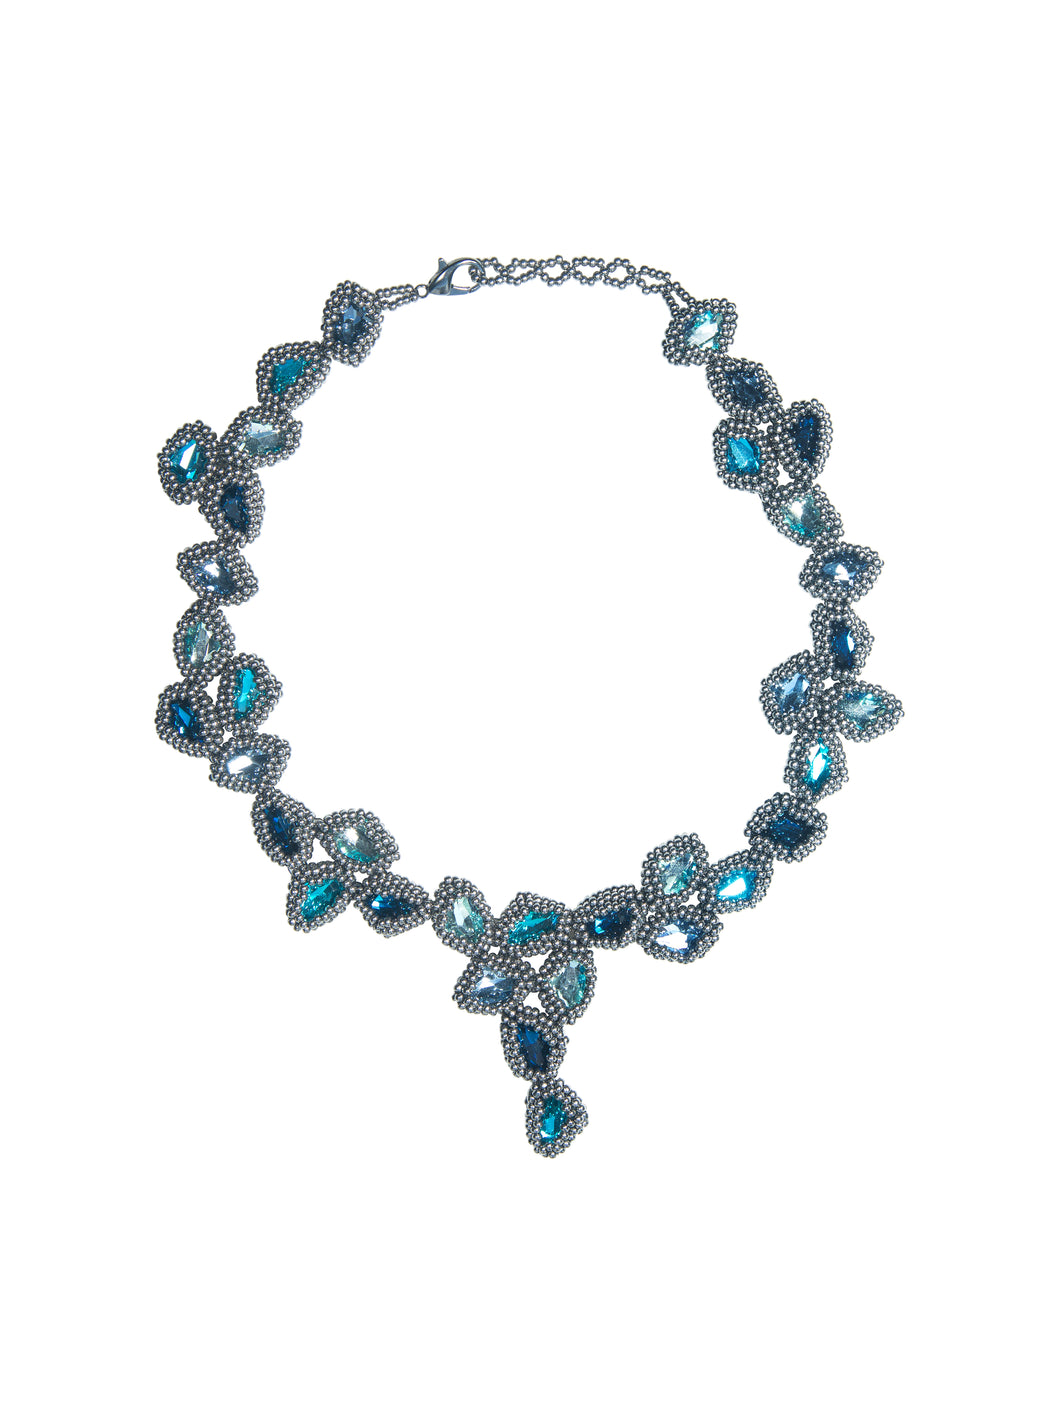 CRYSTAL BEADED NECKLACE